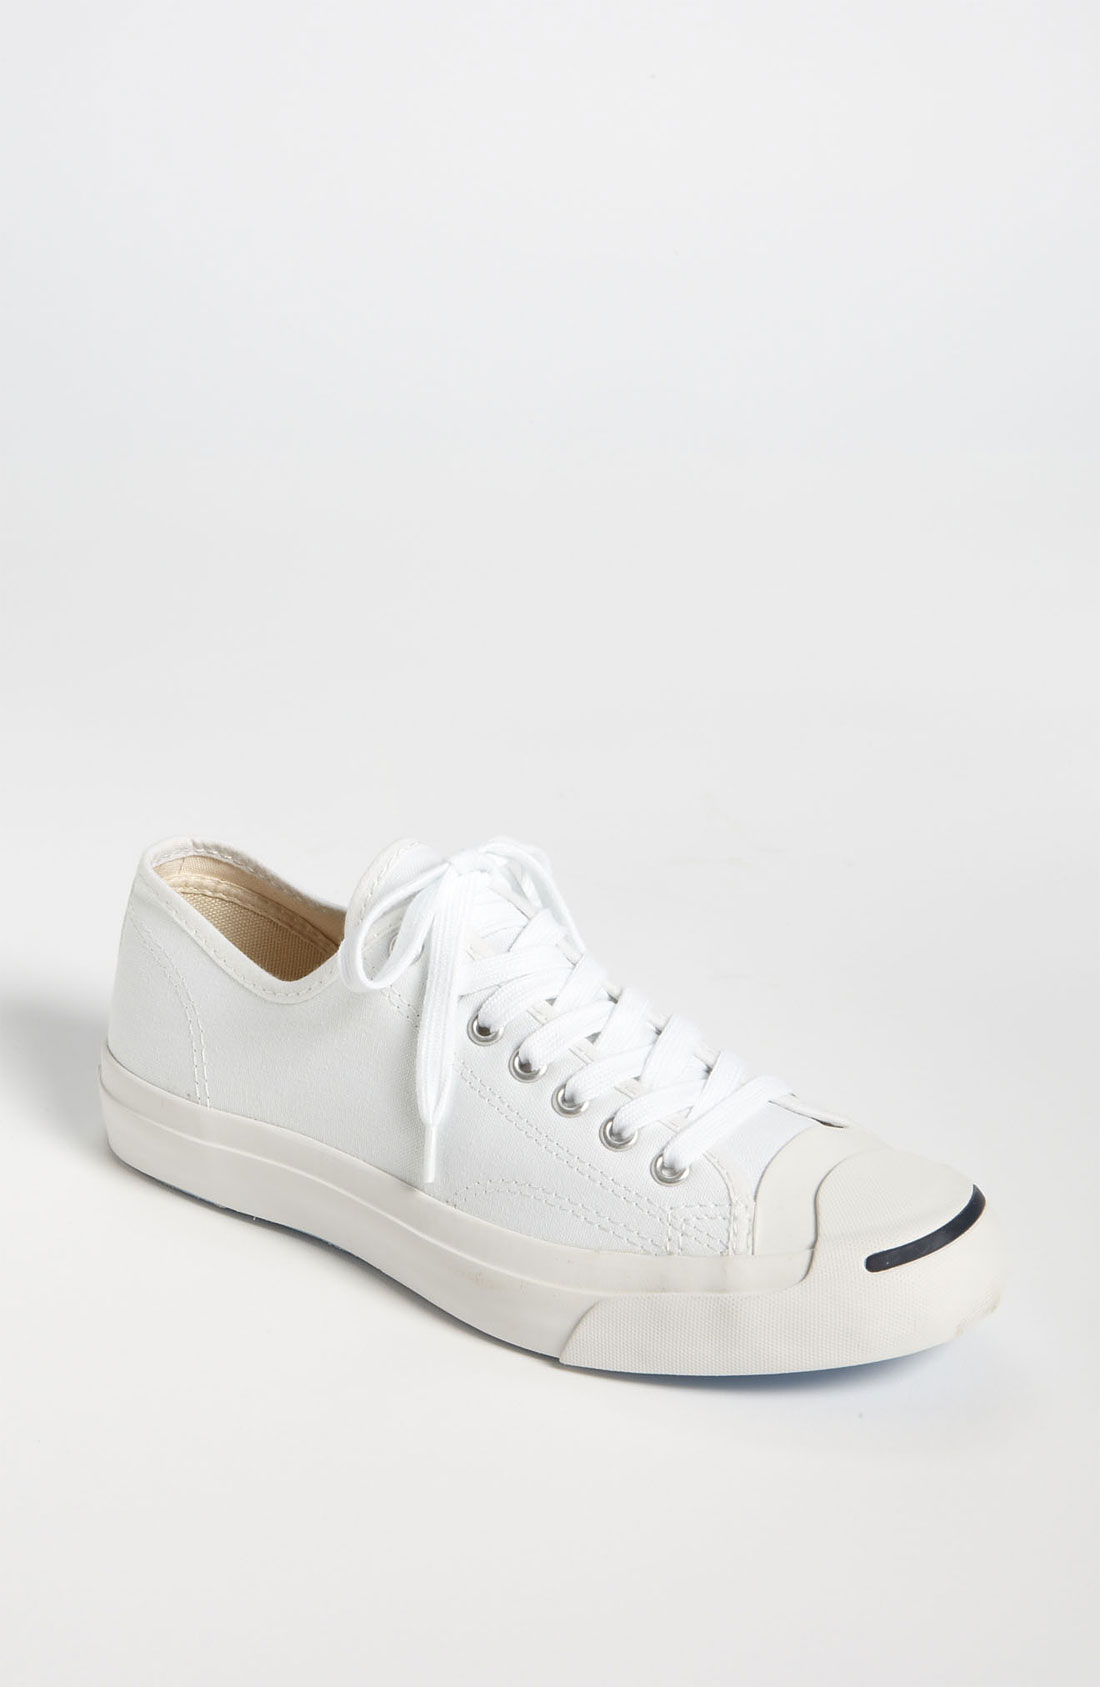 Converse Jack Purcell Sneaker Women in White (white canvas) | Lyst